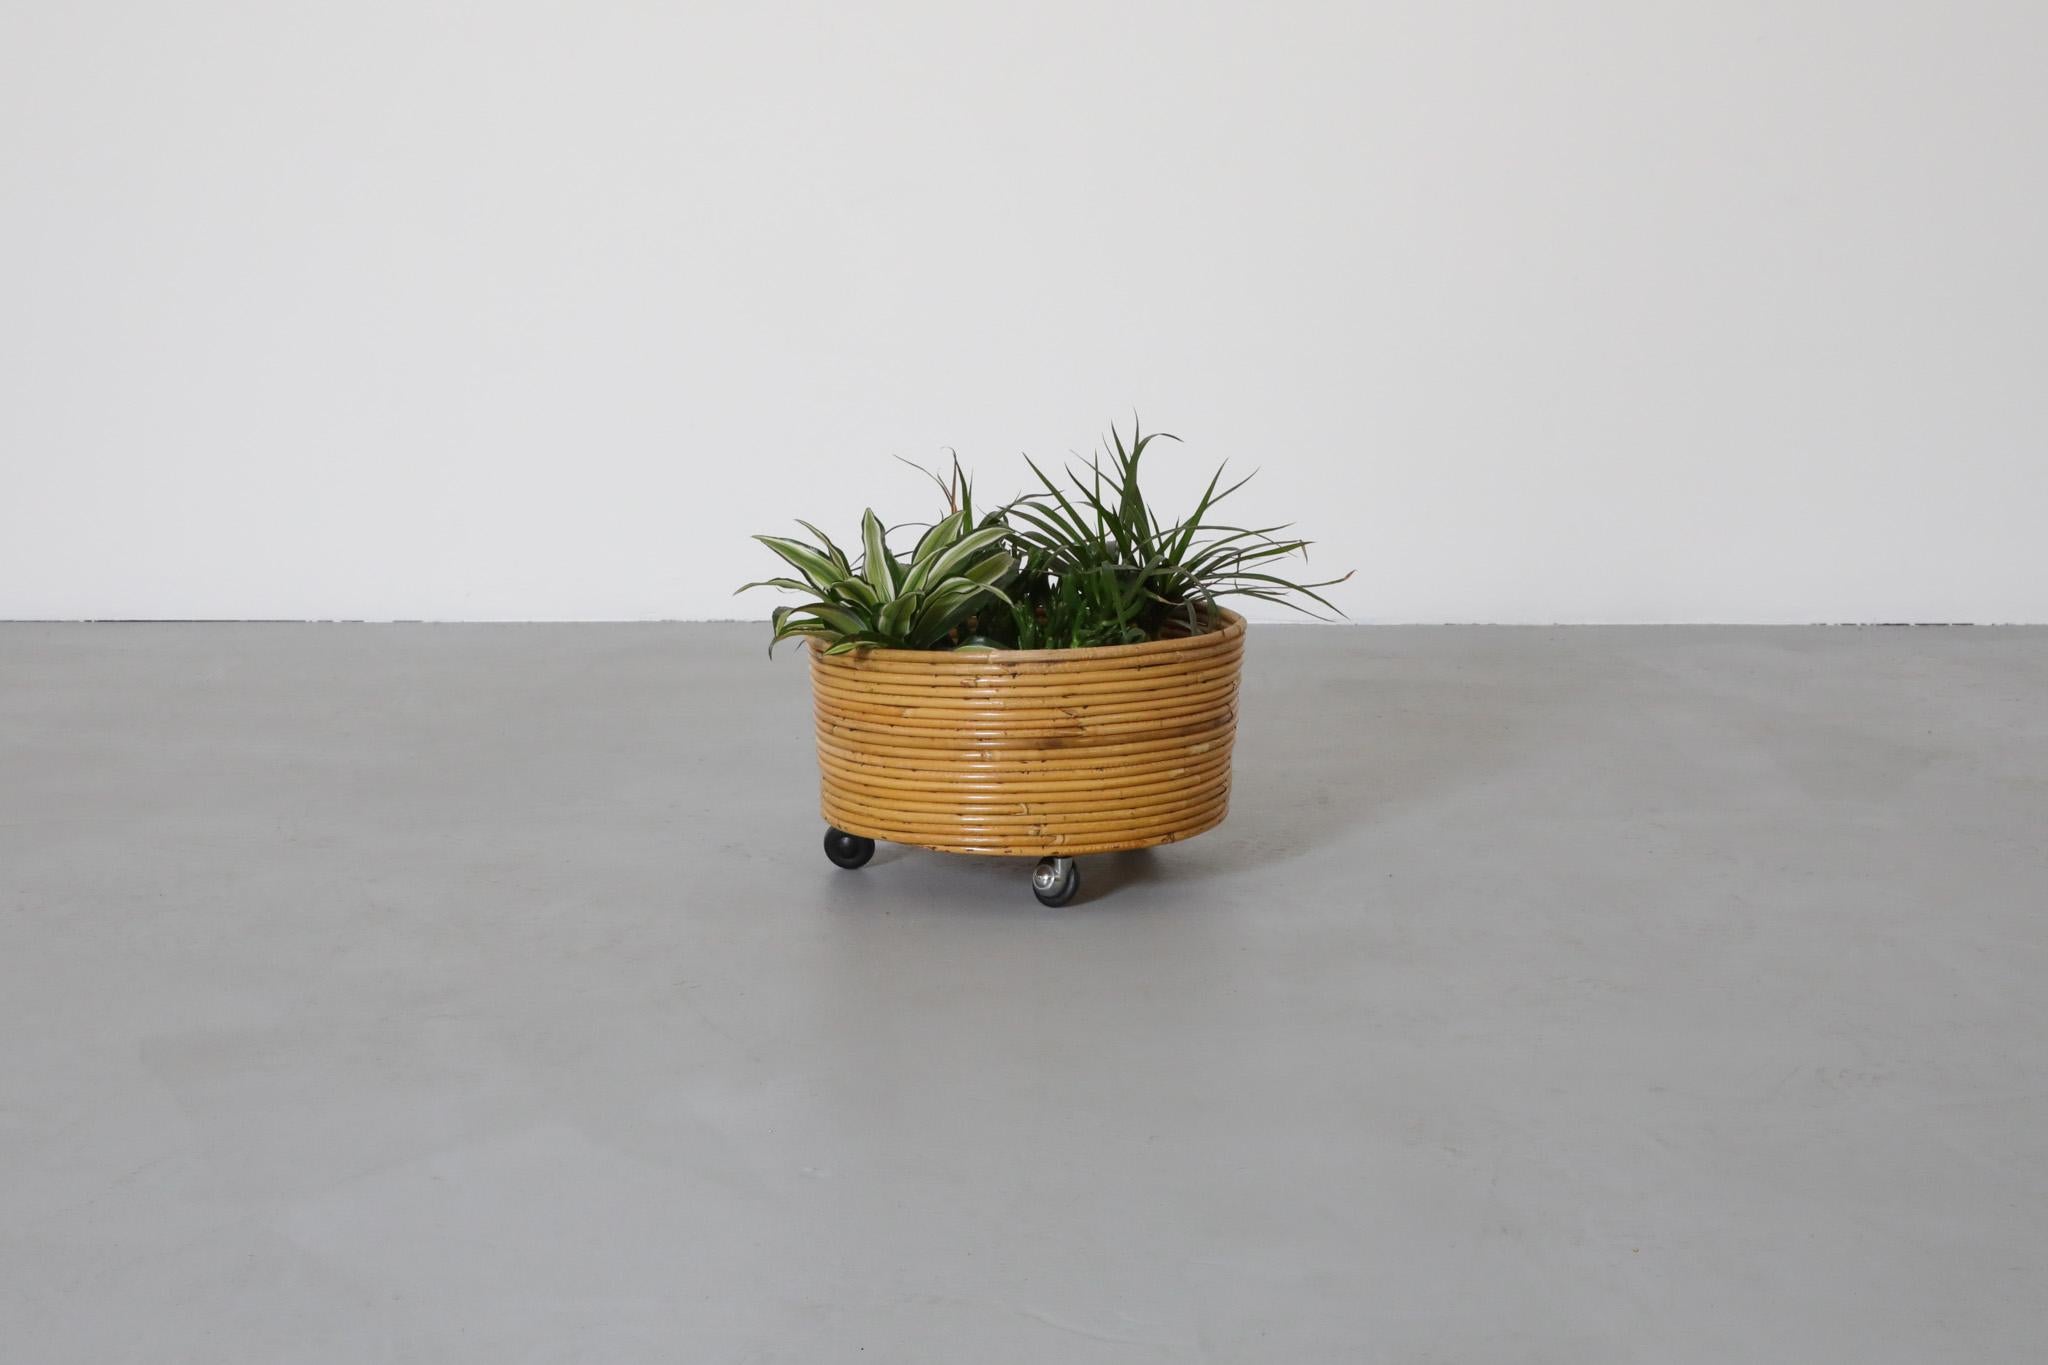 Mid-Century round bamboo wrapped plant stand with round chrome and black wheels. A light weight indoor planter ideal for adding a stylish and organic touch to a space. In original condition with visible wear consistent with its age and use. Plants